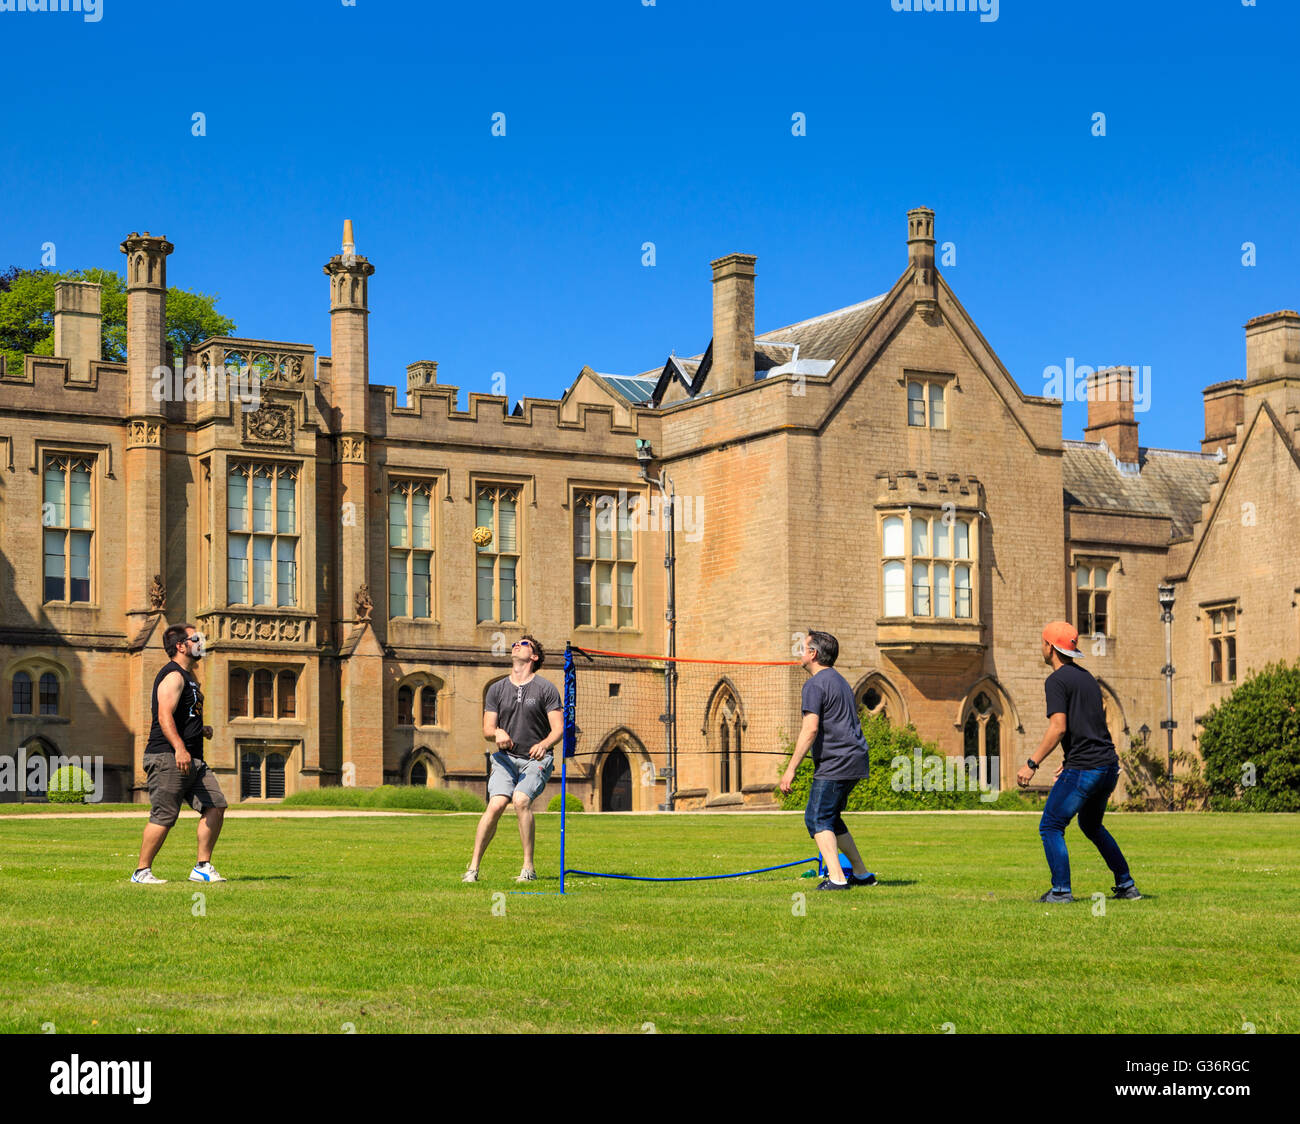 A group of young men playing Sepak Takraw (kick volleyball) on the lawn. At Newstead Abbey Stock Photo